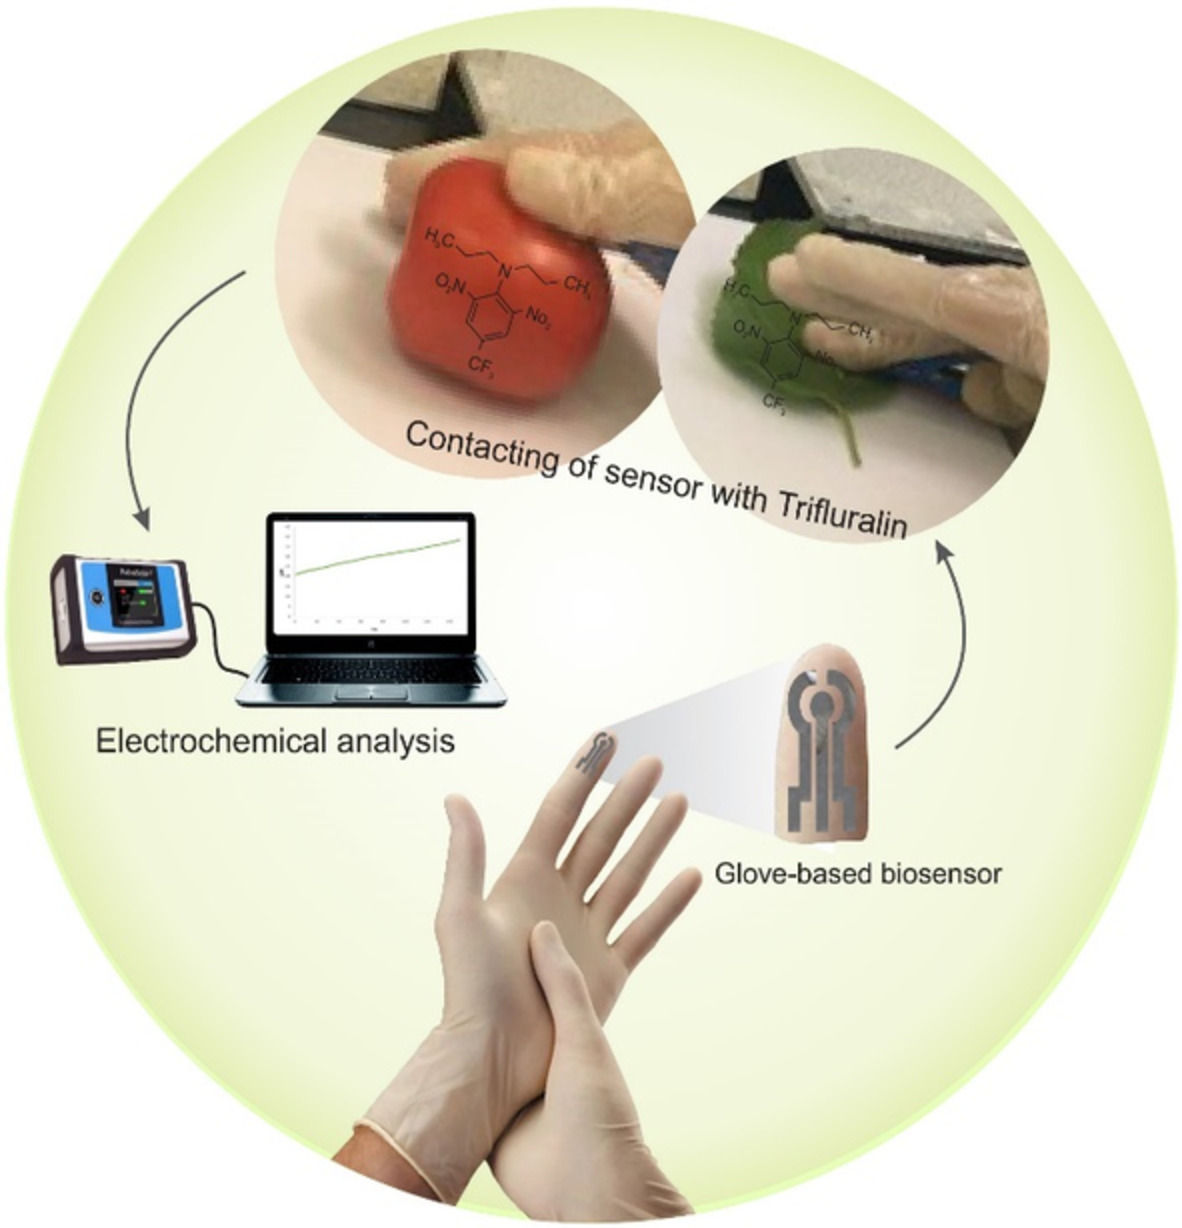 Trifluralin recognition using touch‐based fingertip: Application of wearable glove‐based sensor toward environmental pollution and human health control